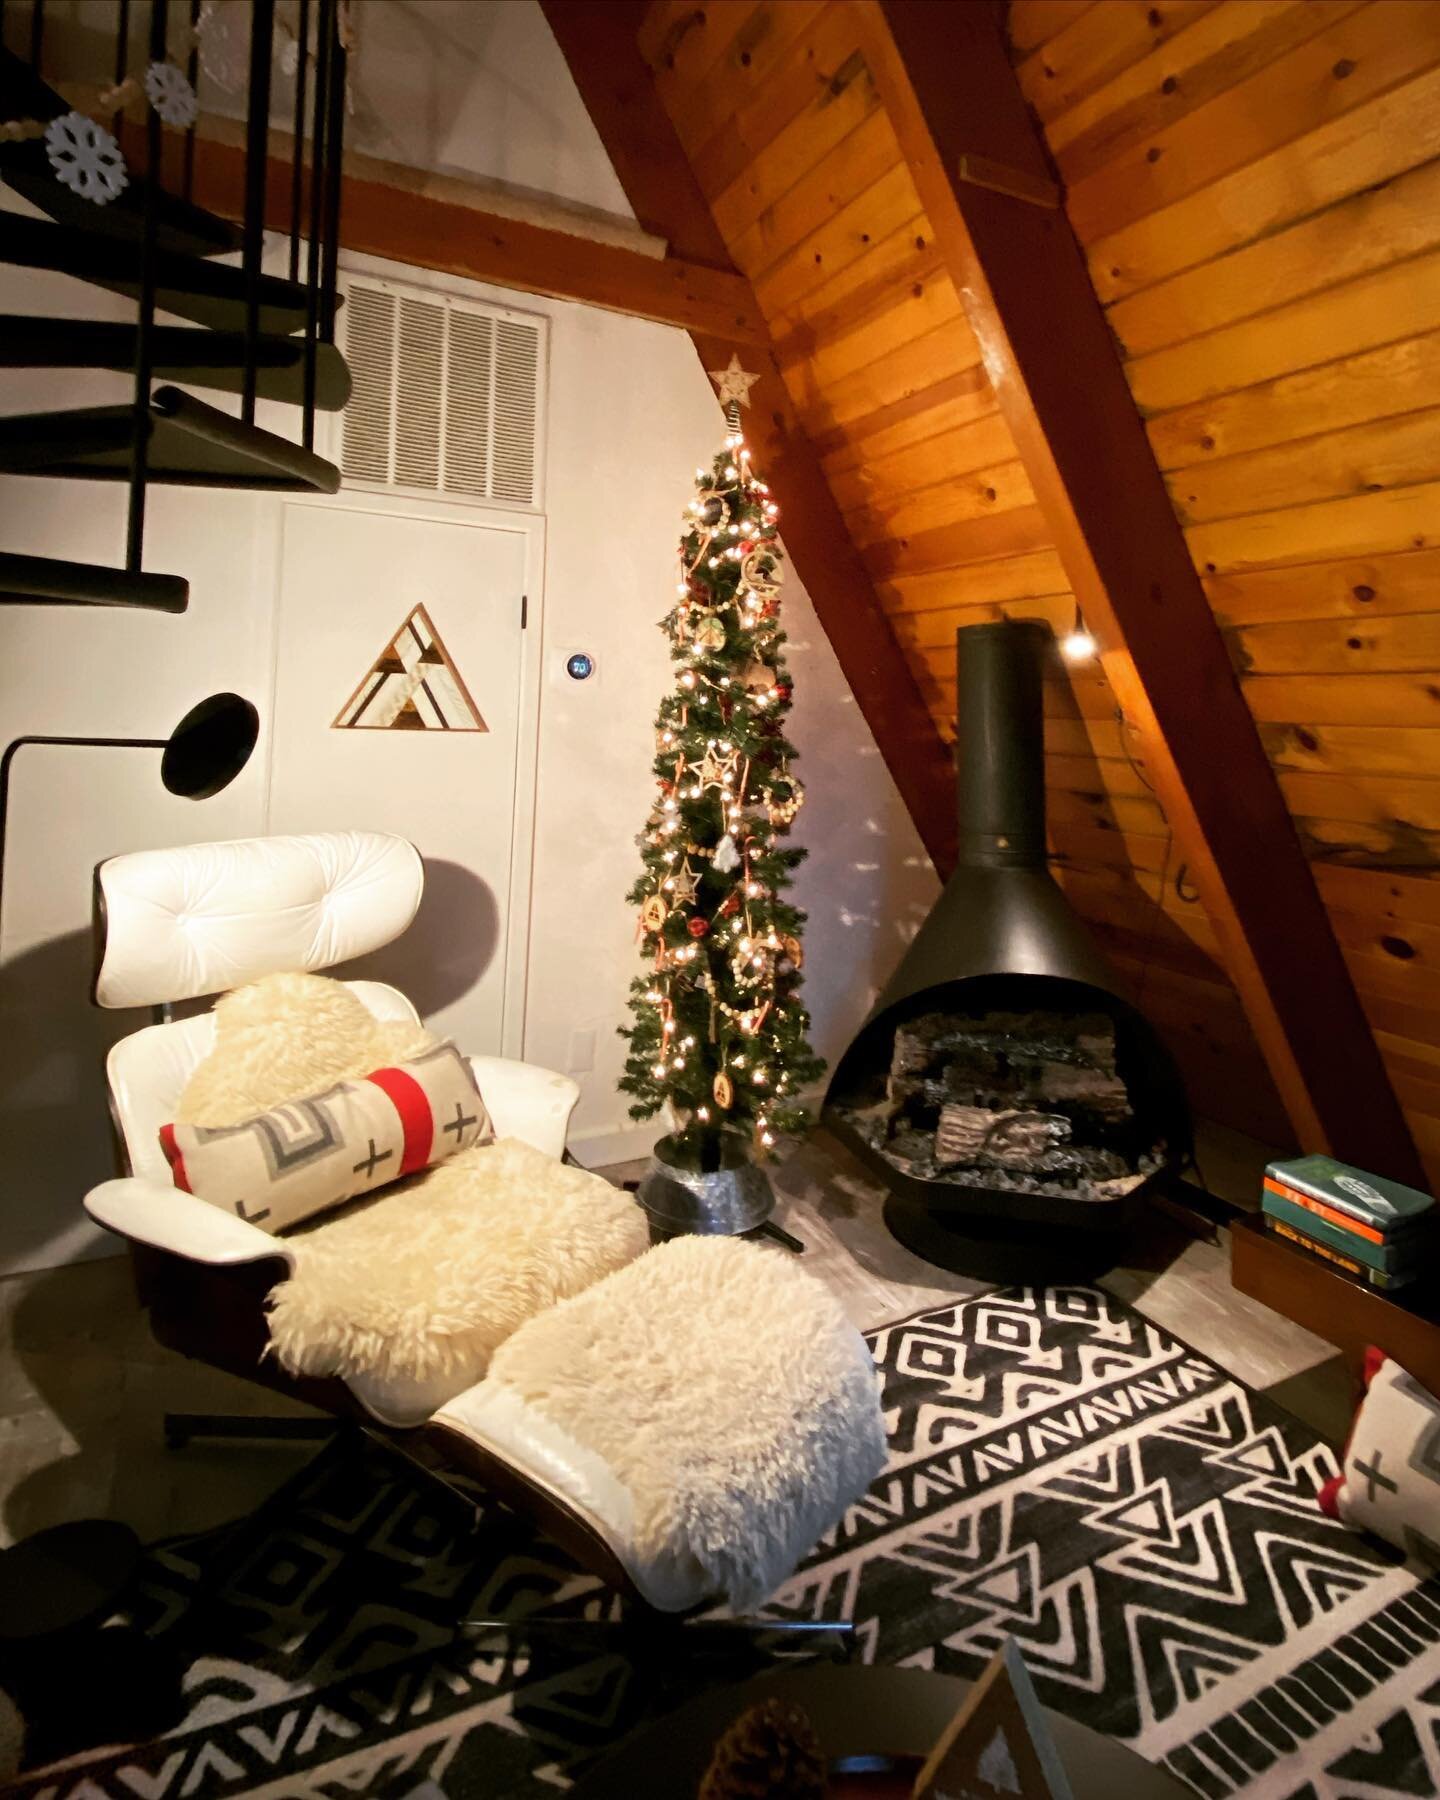 We had a last minute cancellation for Christmas AND New Years!!! Who would love to spend the holidays (12/23-1/2) at K&uuml;lhaus?!! YOU DO!!! We got the festive decorations, coziness and ALL the snow on lock!!

BOOK now (5 night minimum stay) - link